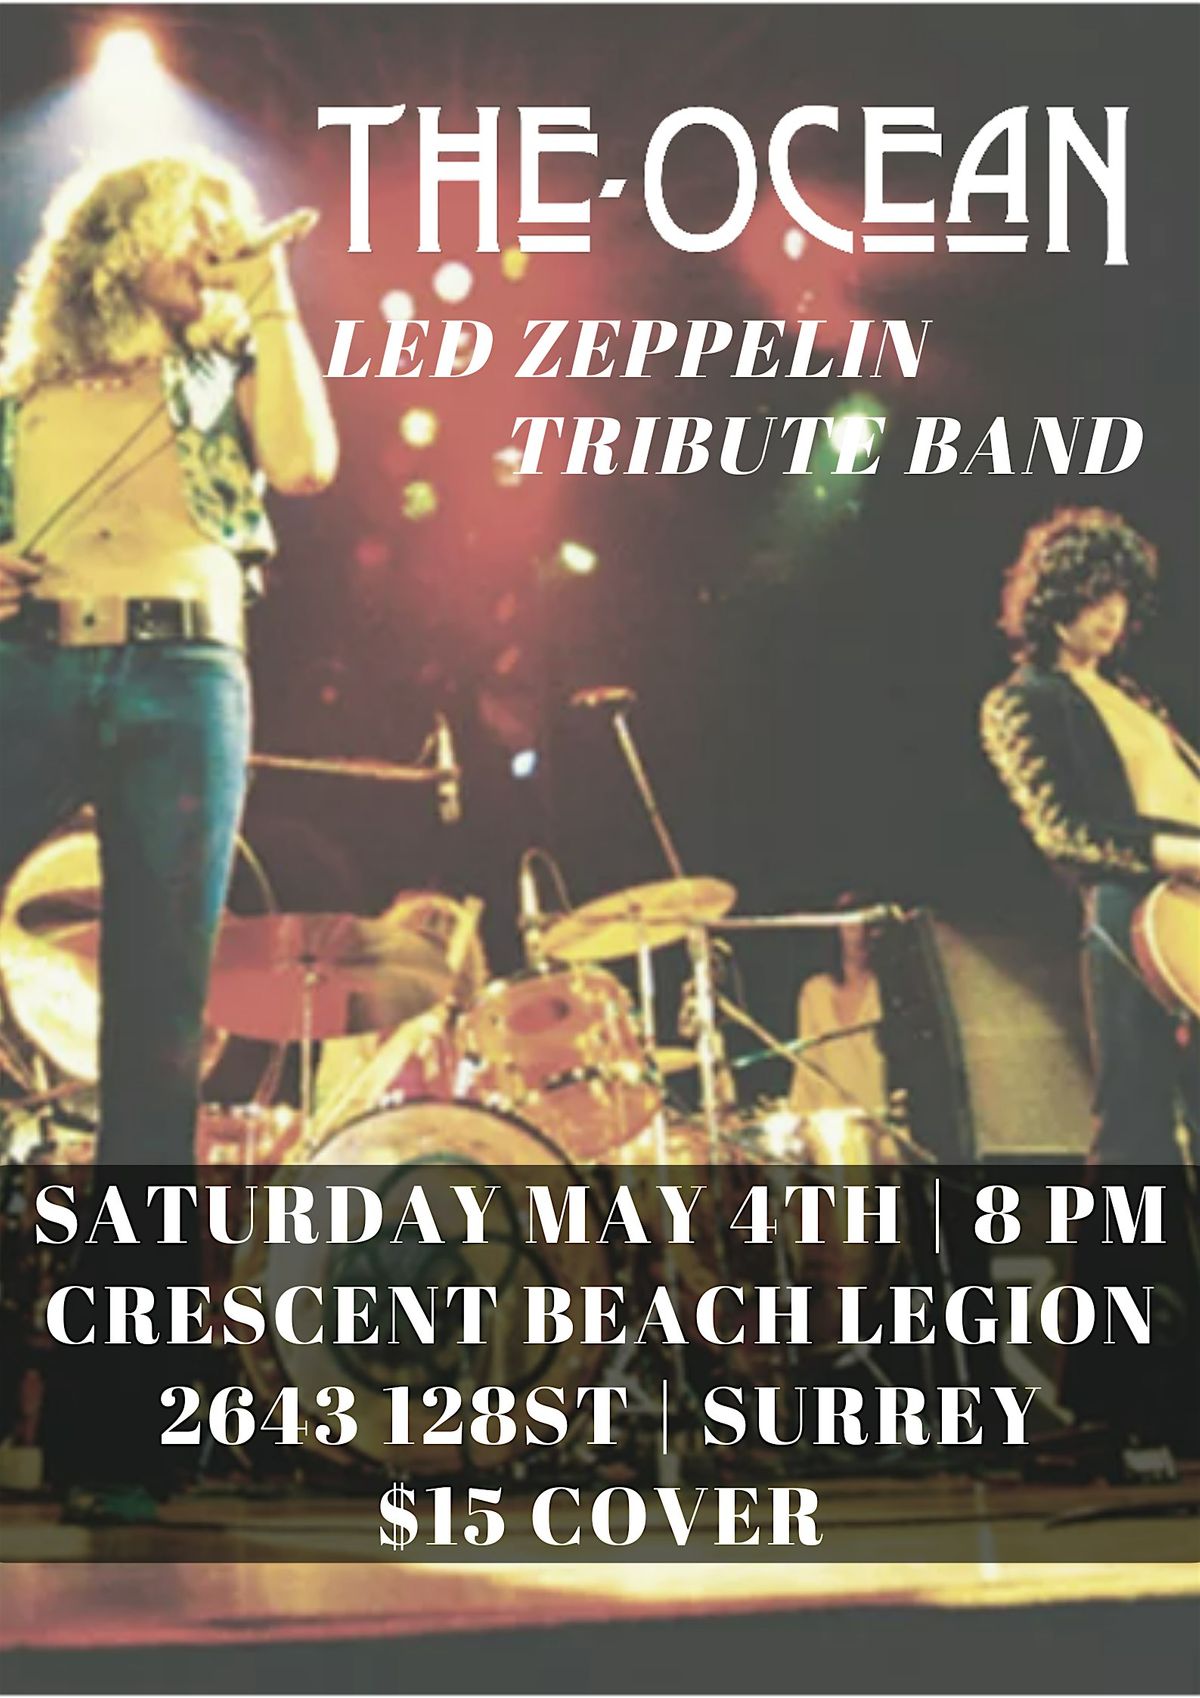 The Ocean Led Zeppelin Tribute Band and Cresent Beach Legion